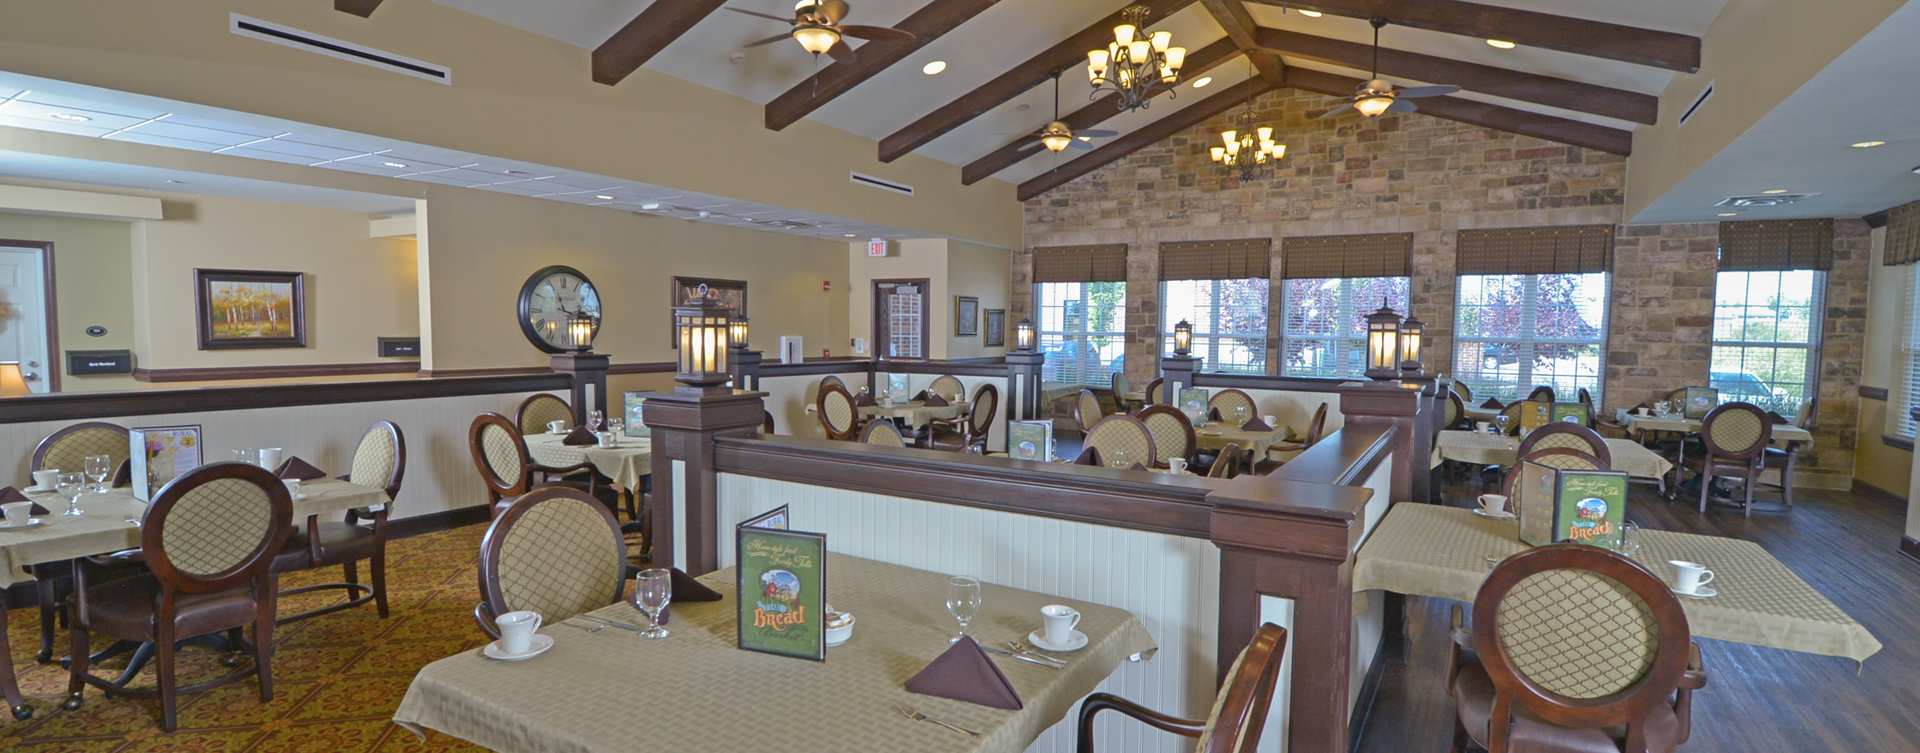 Enjoy restaurant -style meals served three times a day in our dining room at Bickford of Crown Point